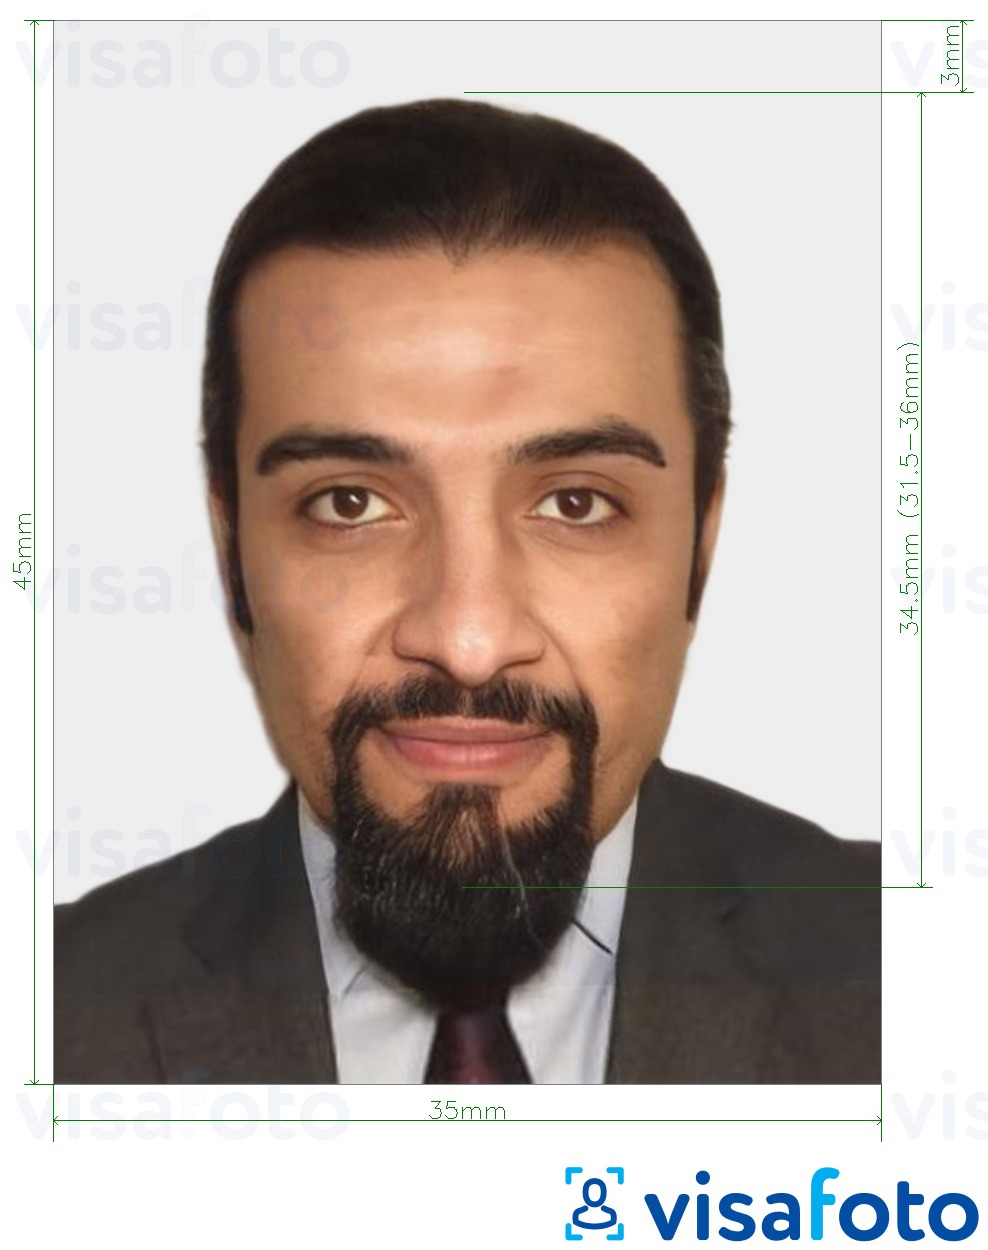 Example of photo for Iraq ID card 35x45 mm (3.5x4.5 cm) with exact size specification